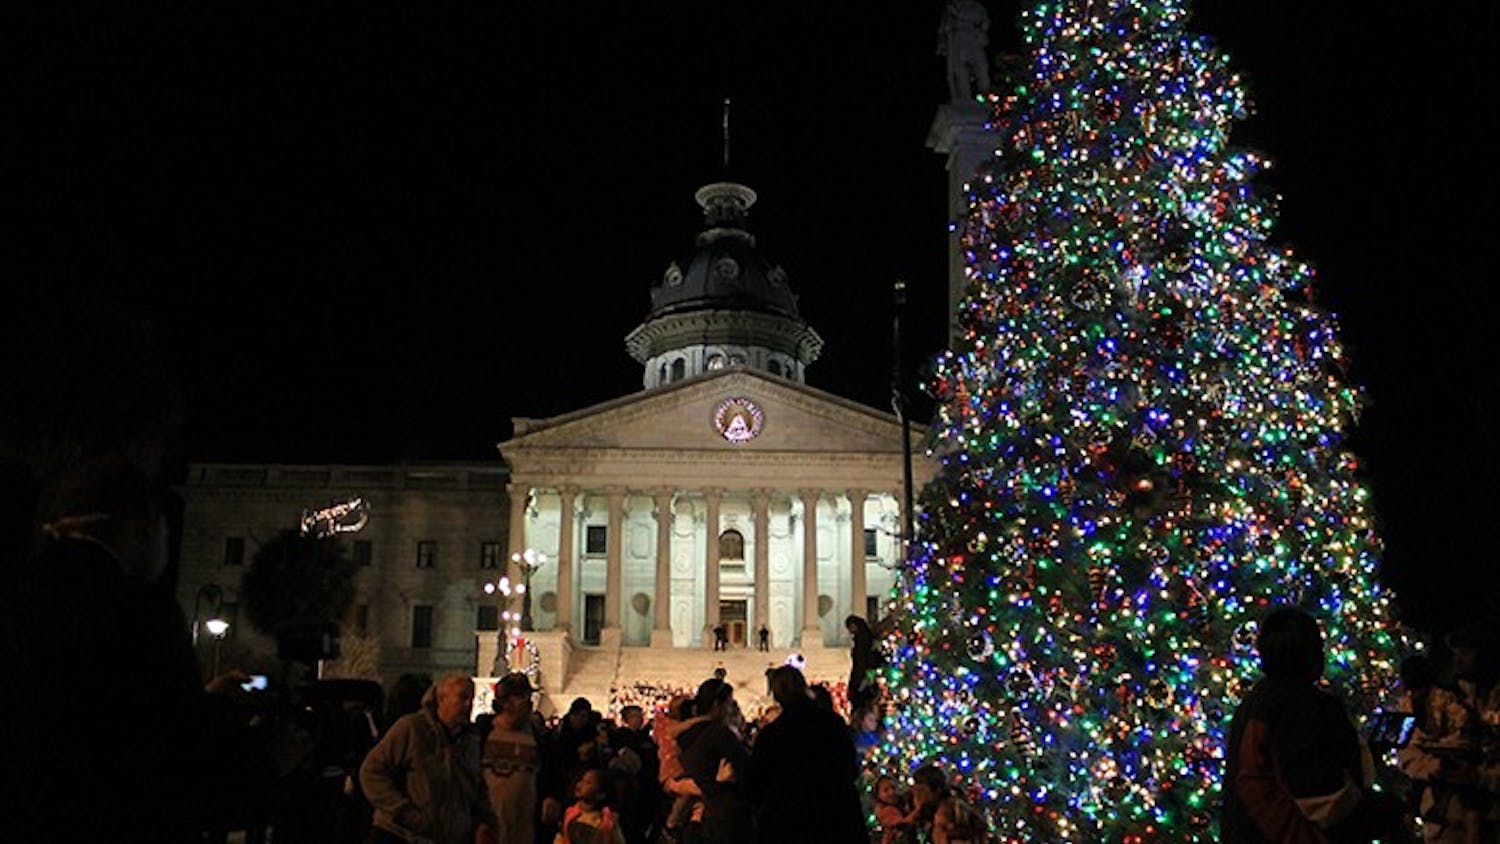 The annual Governor's Carolighting celebrates the lighting of the State Christmas Tree and marks the kickoff of the holiday season.